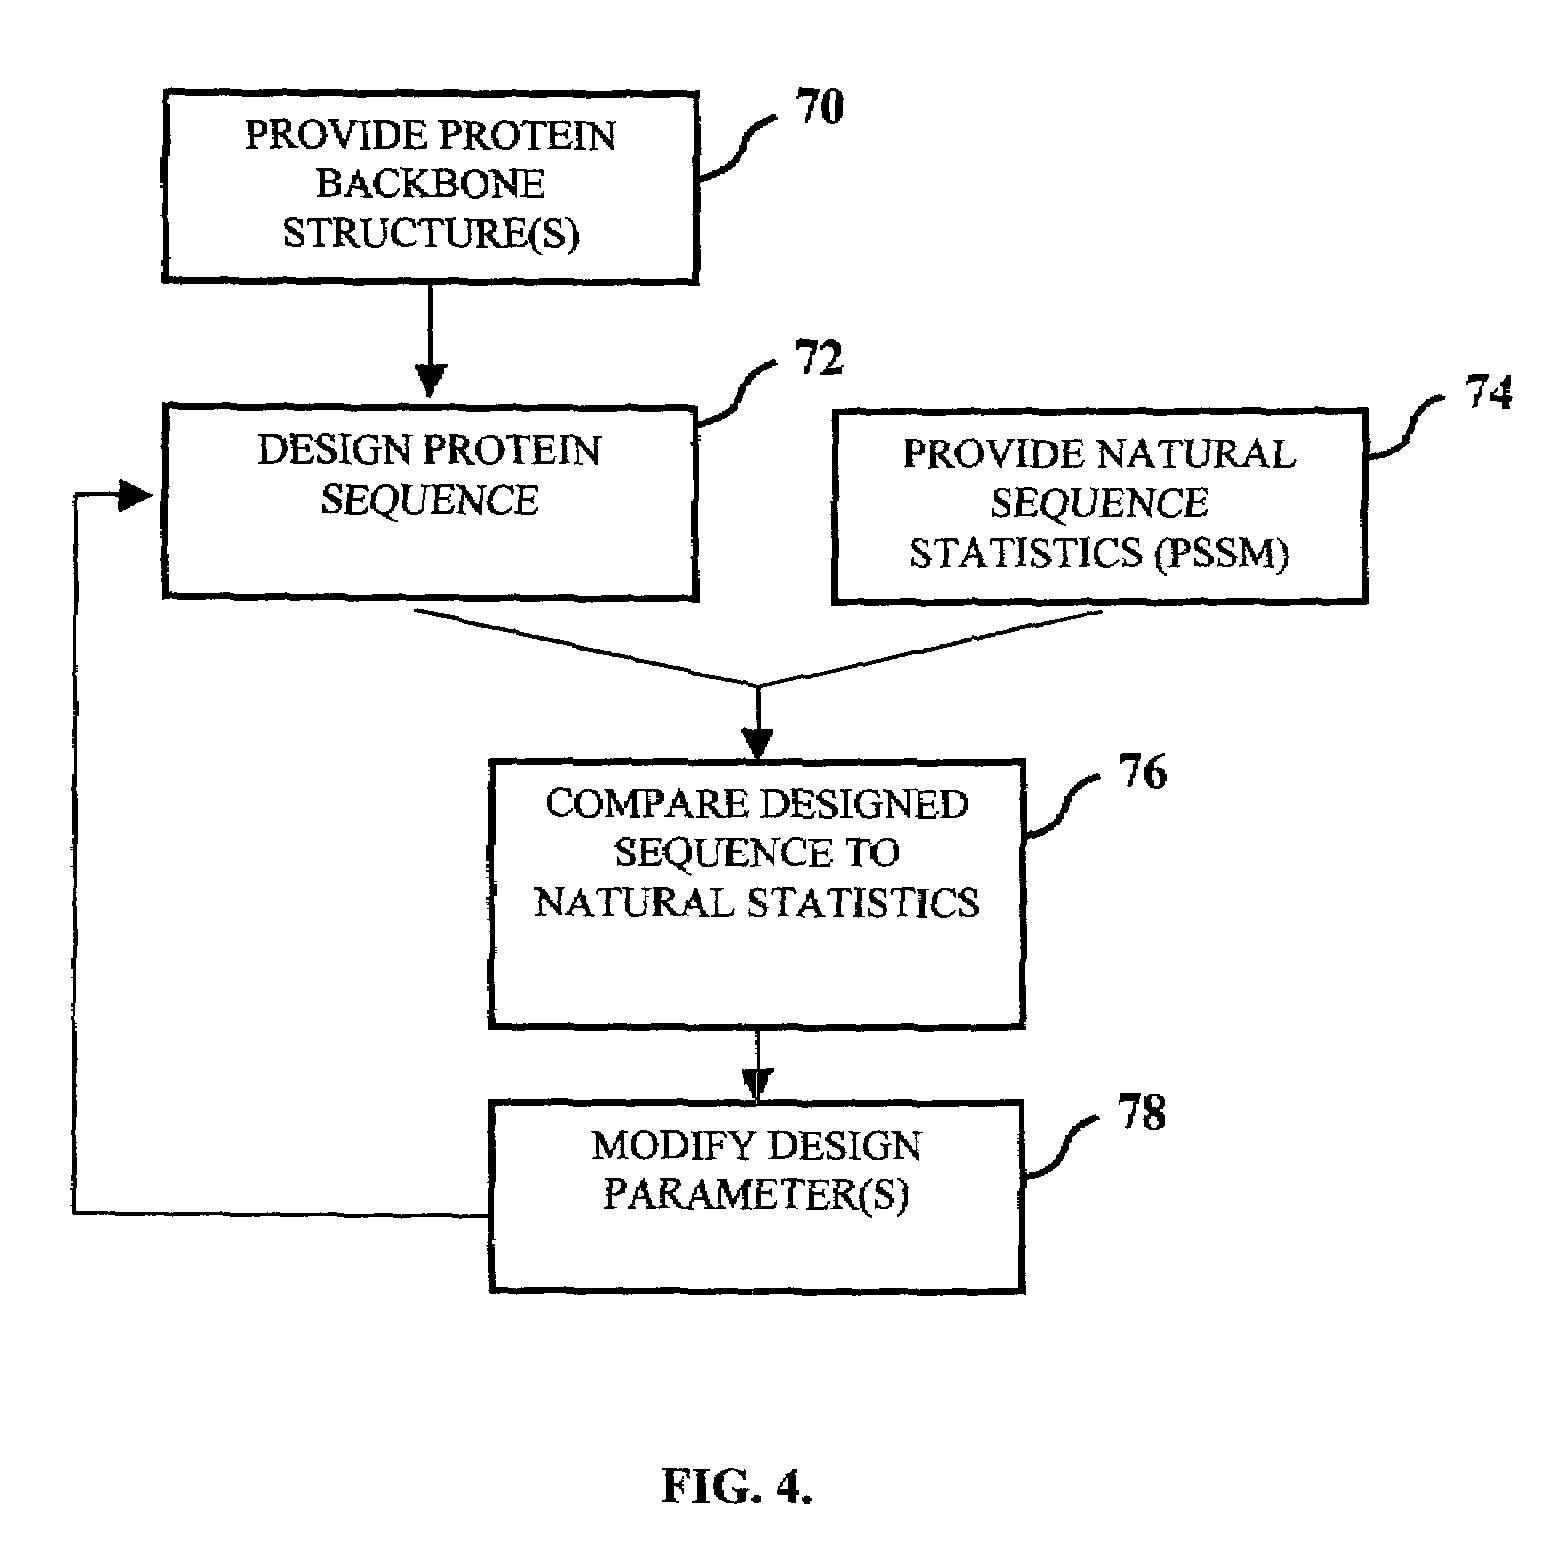 Apparatus and method for designing proteins and protein libraries